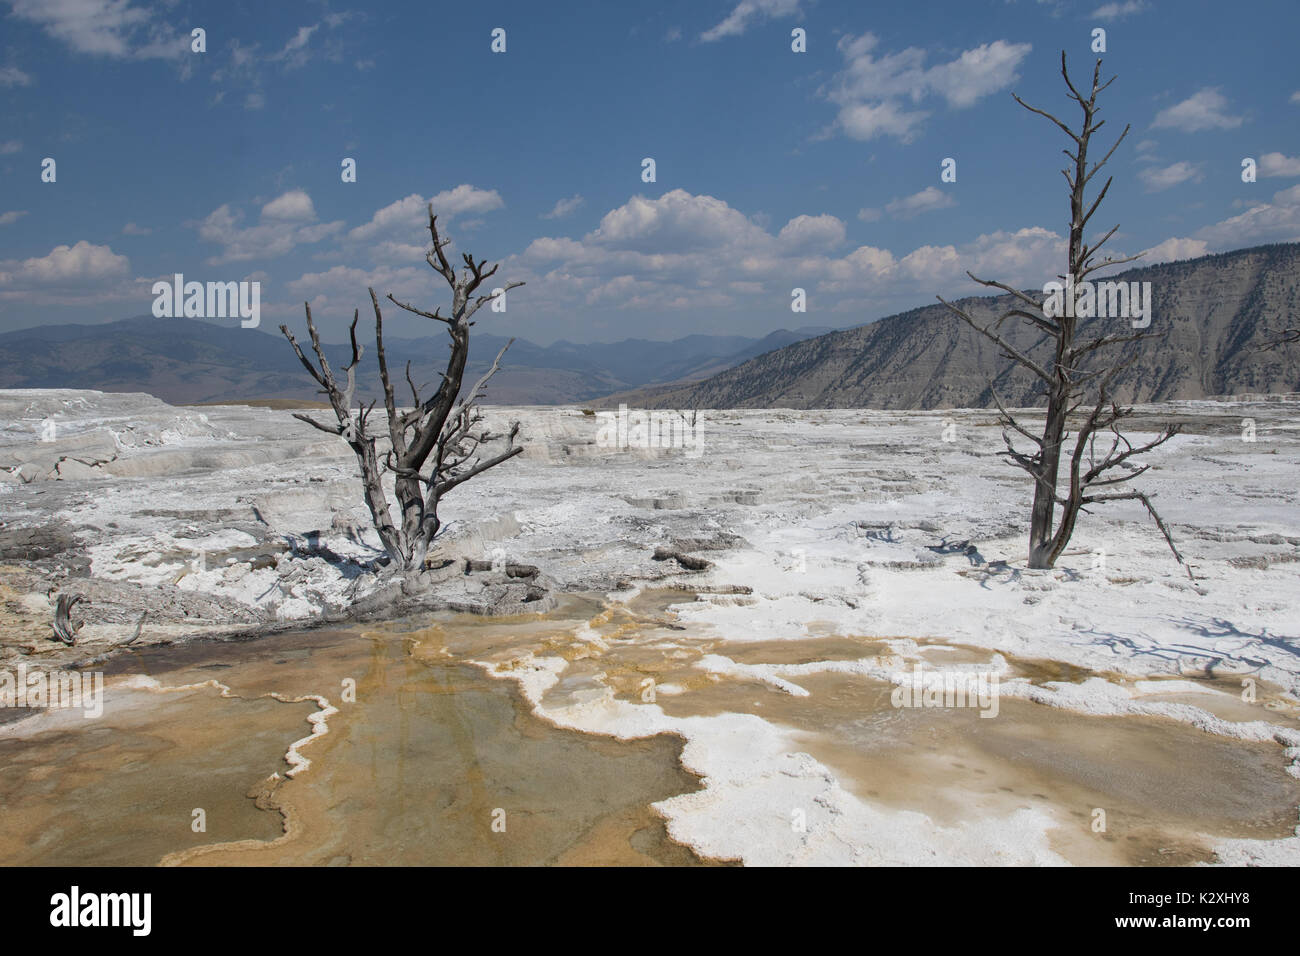 White Mammoth landscape with dead trees in Angel Terrace, Mamoth Hot Springs, Yellowstone National Park, WY Stock Photo